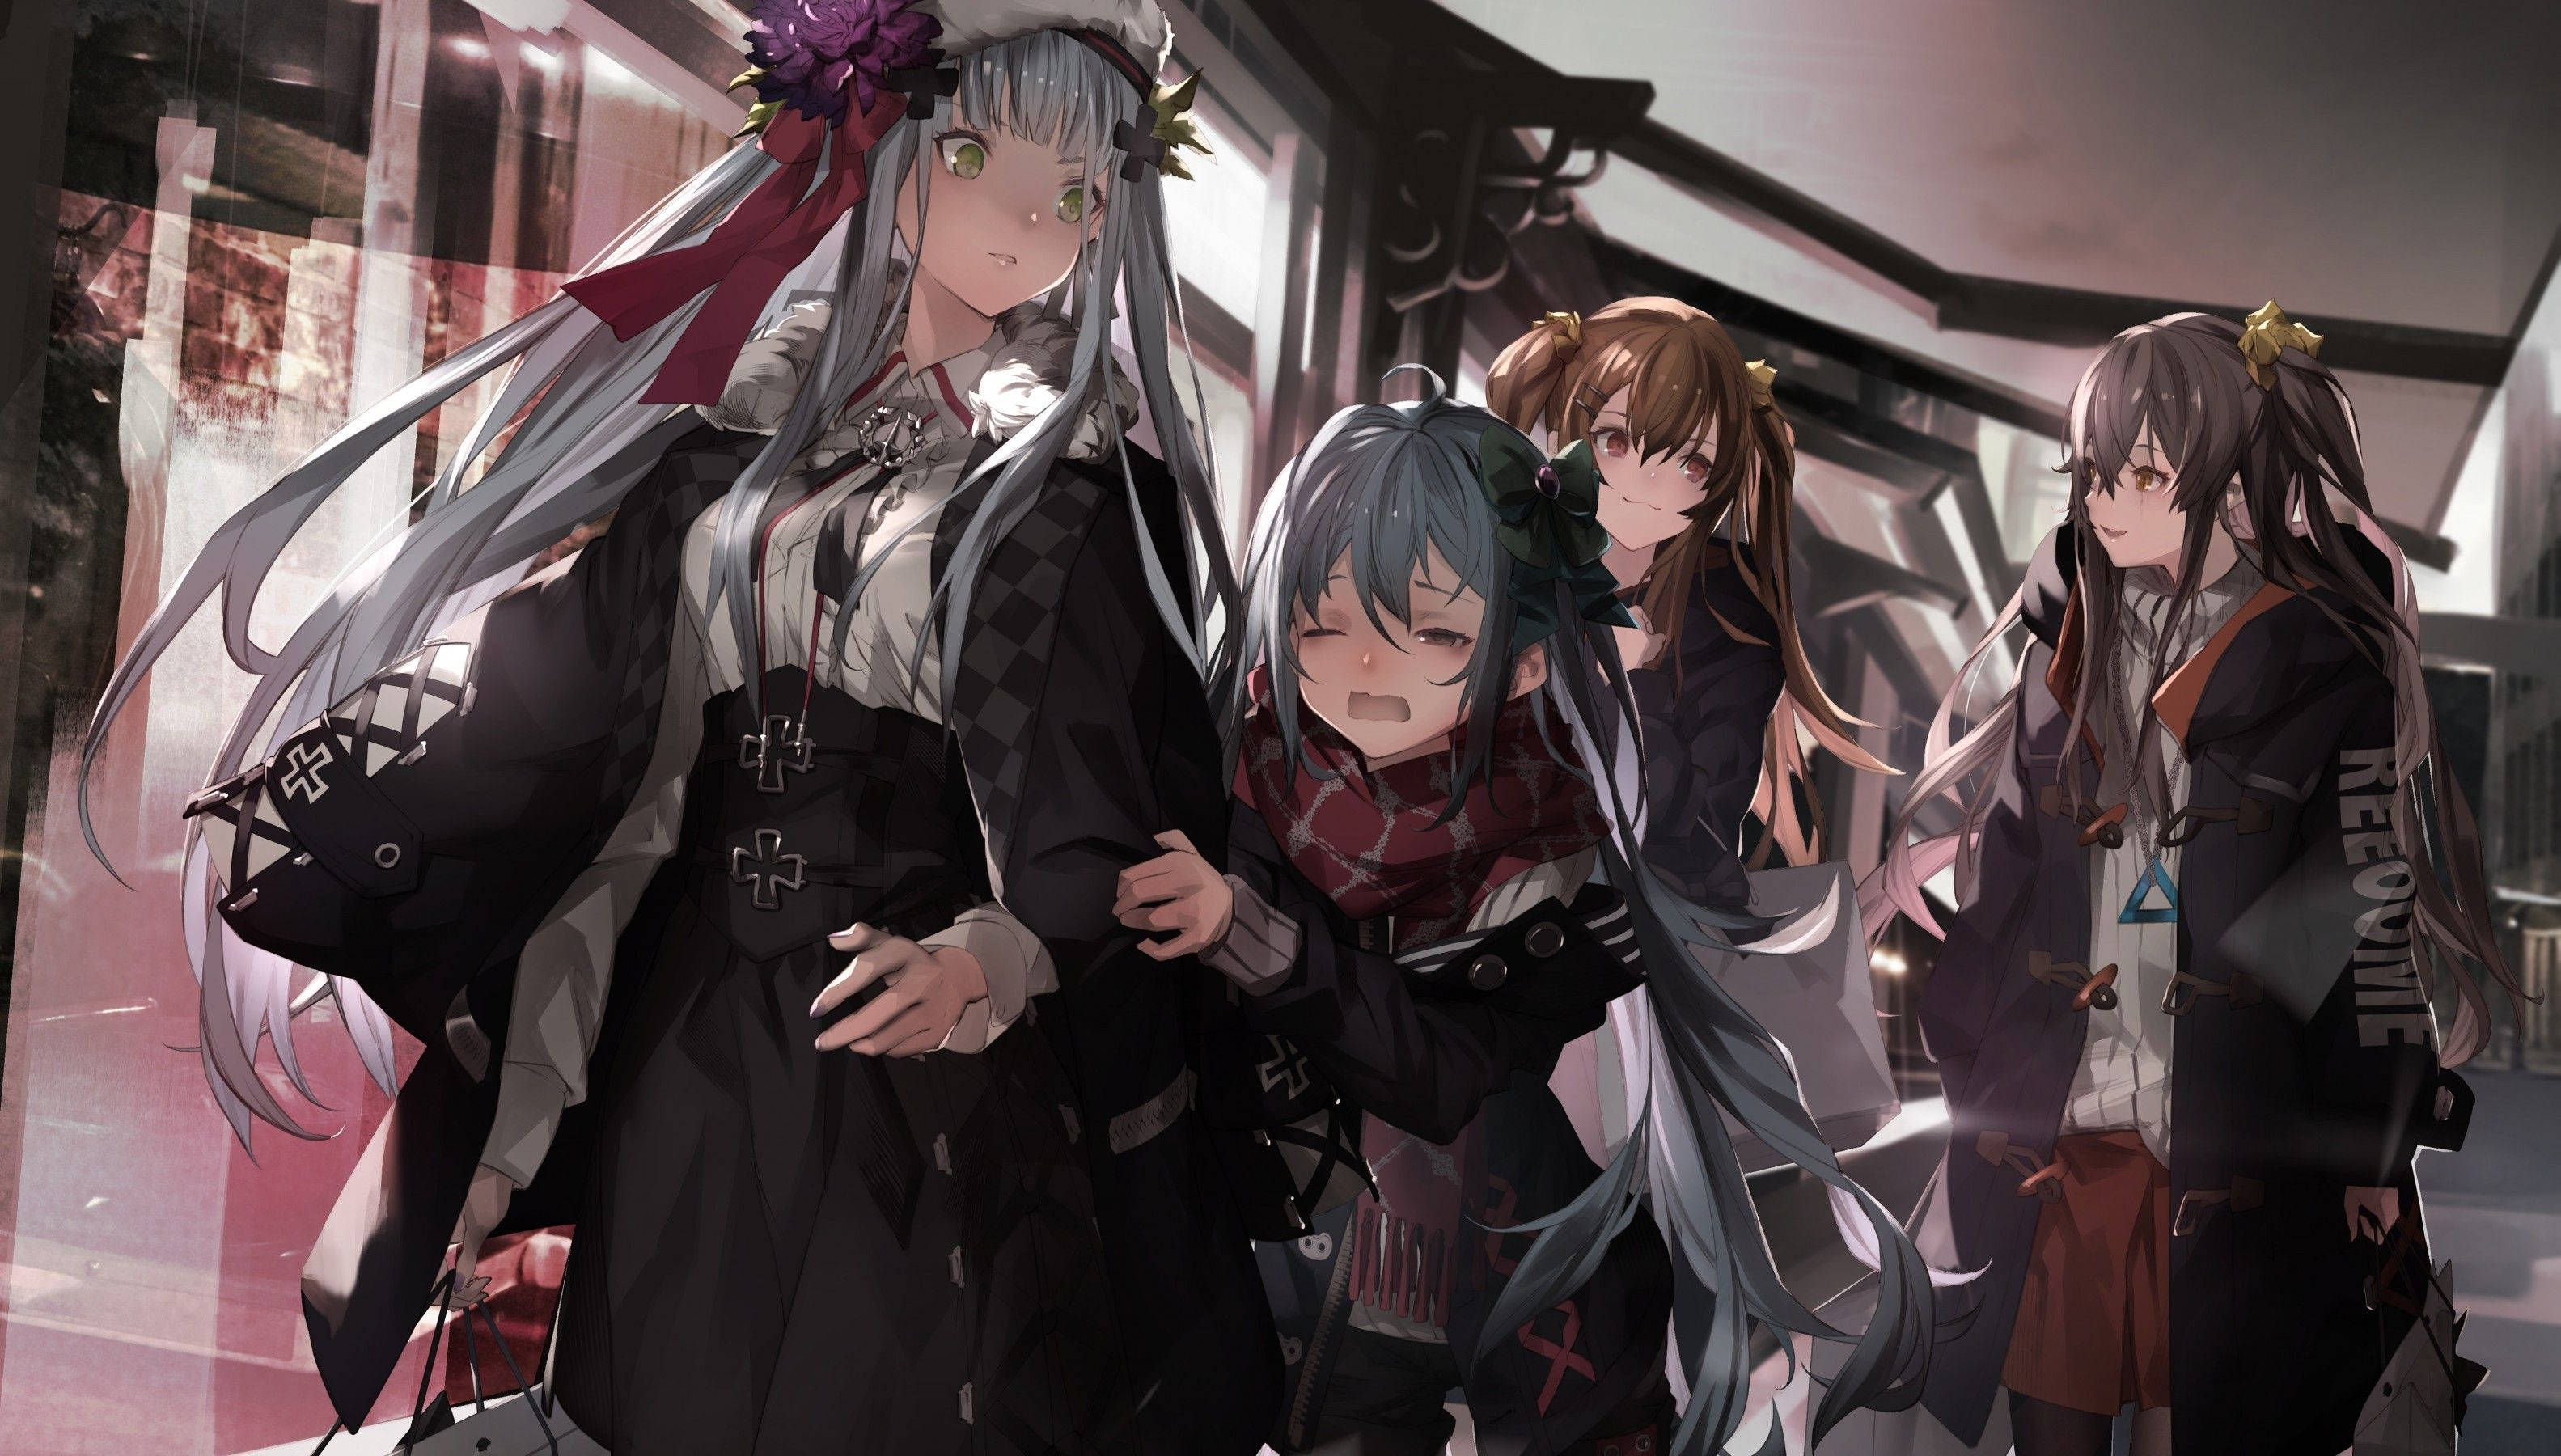 G11 And Hk416 Girls Frontline Background